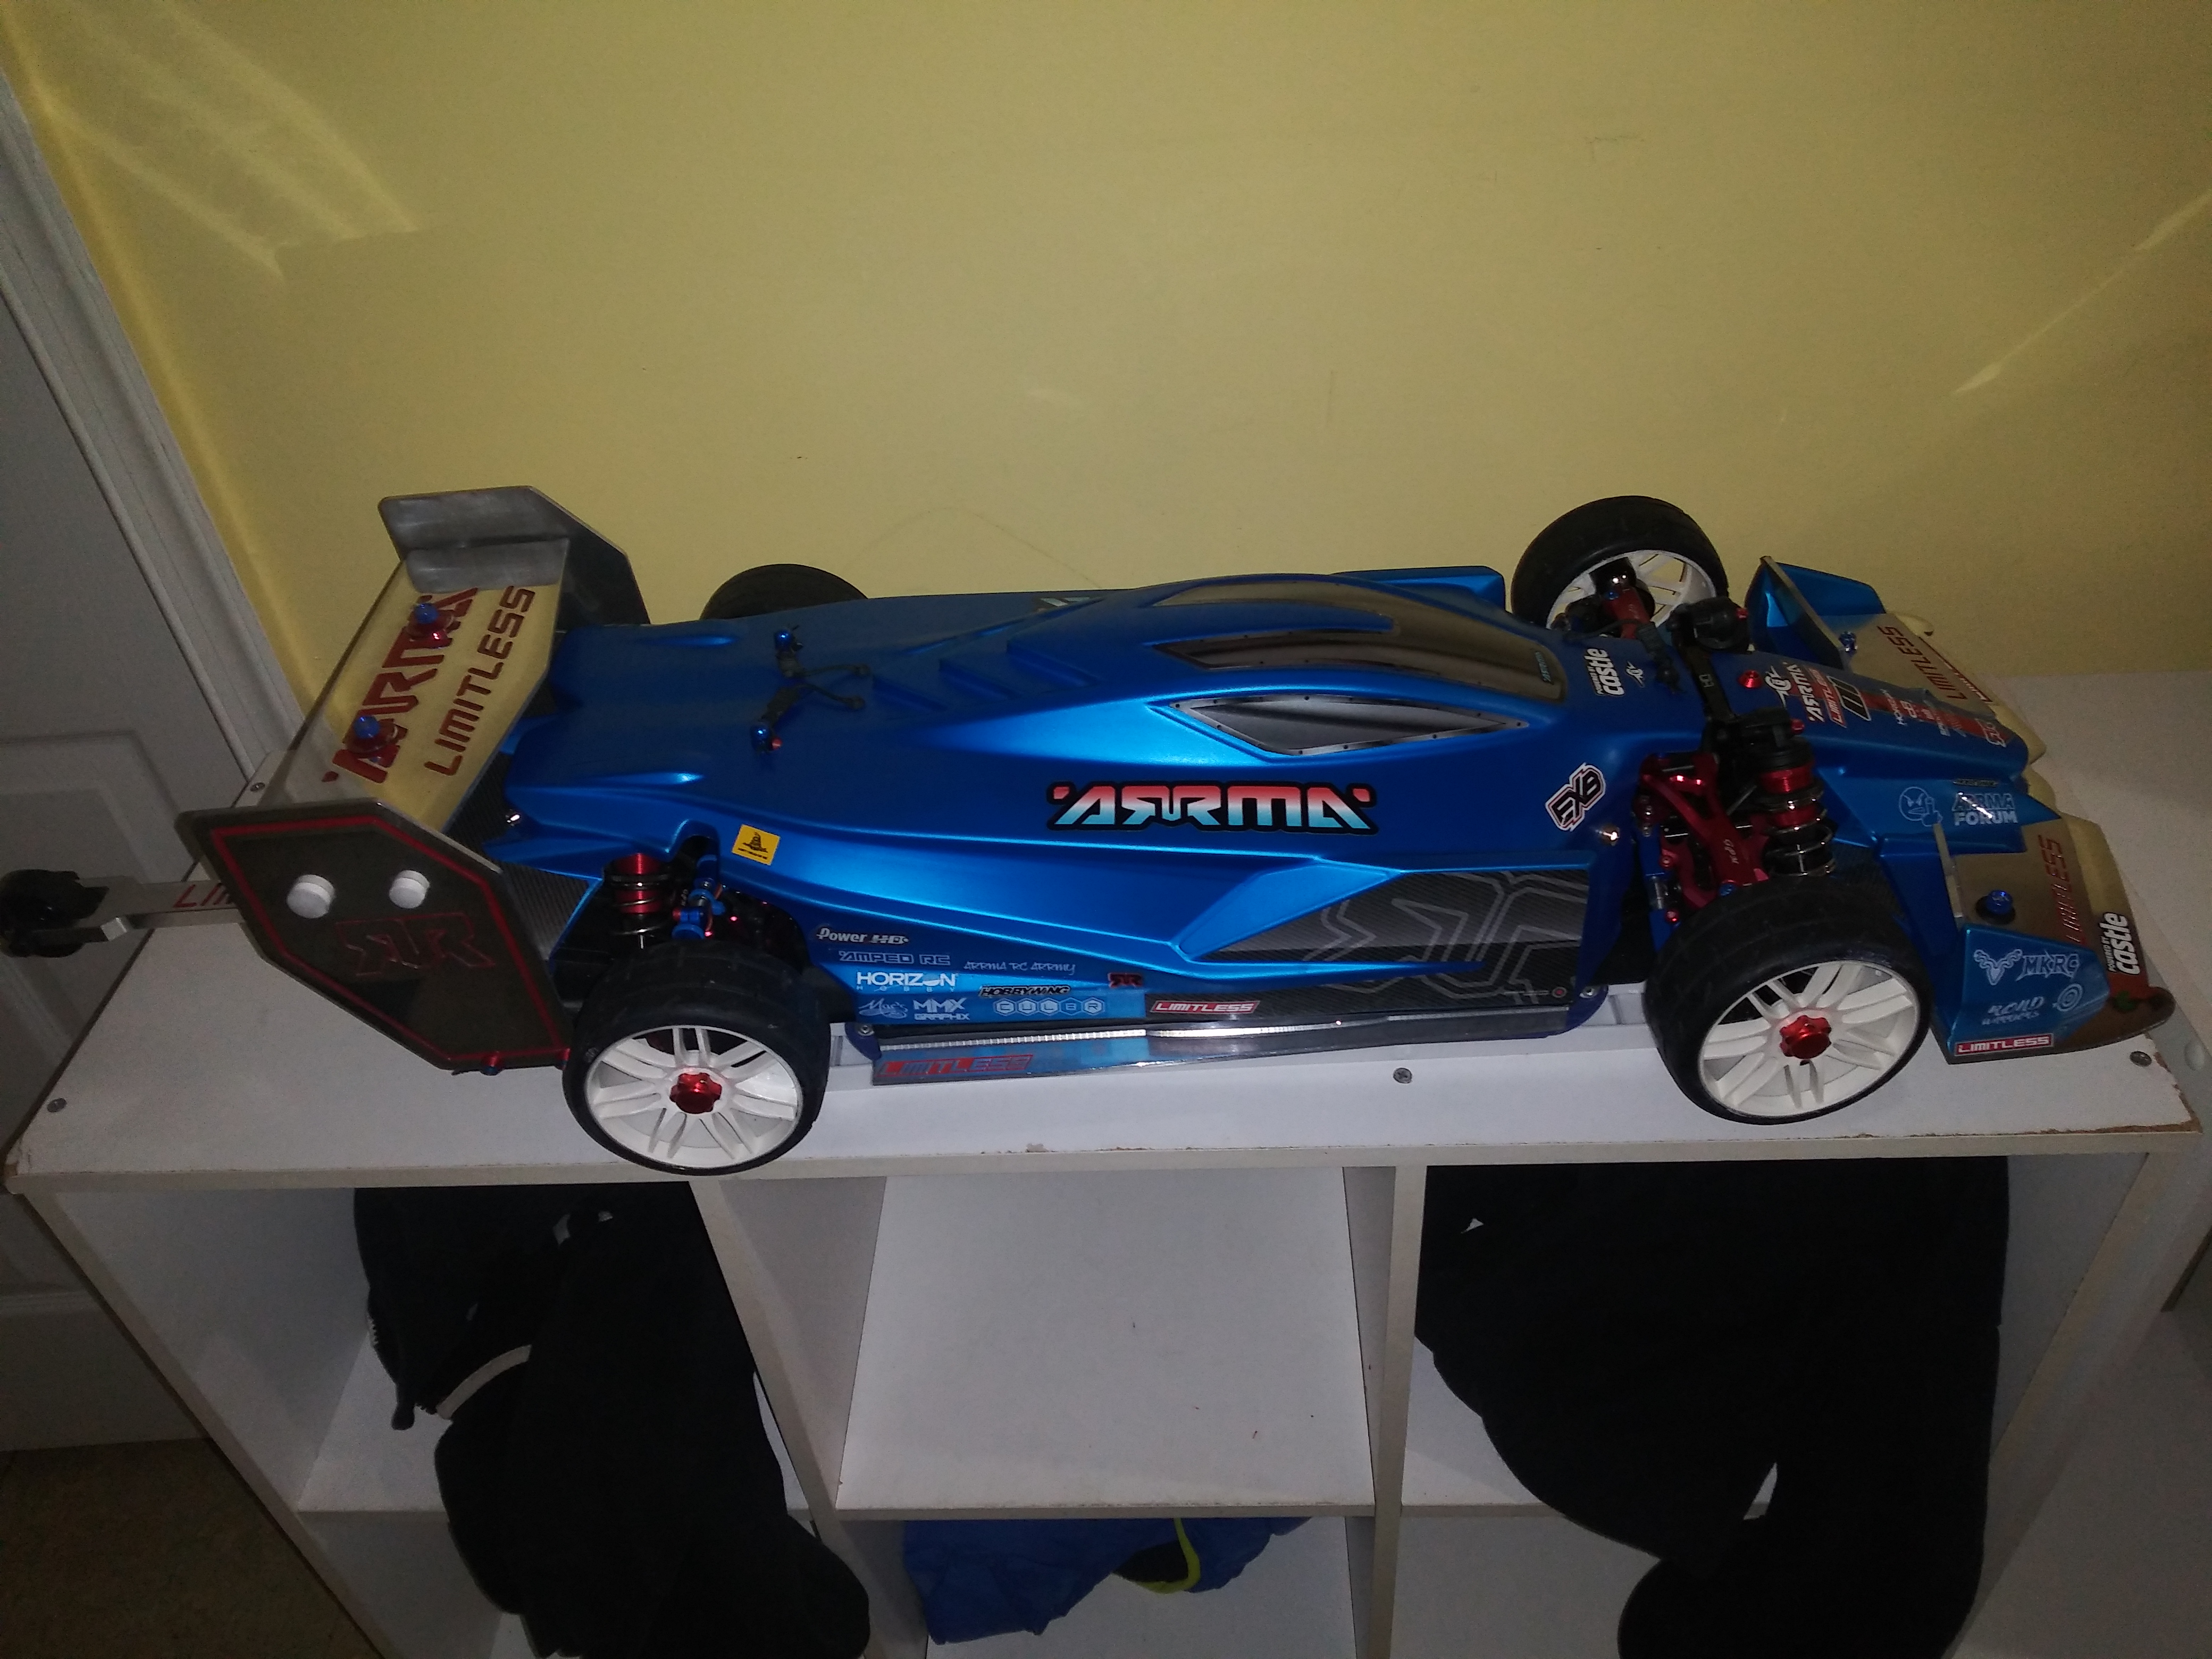 Arrma Limitless (my project)